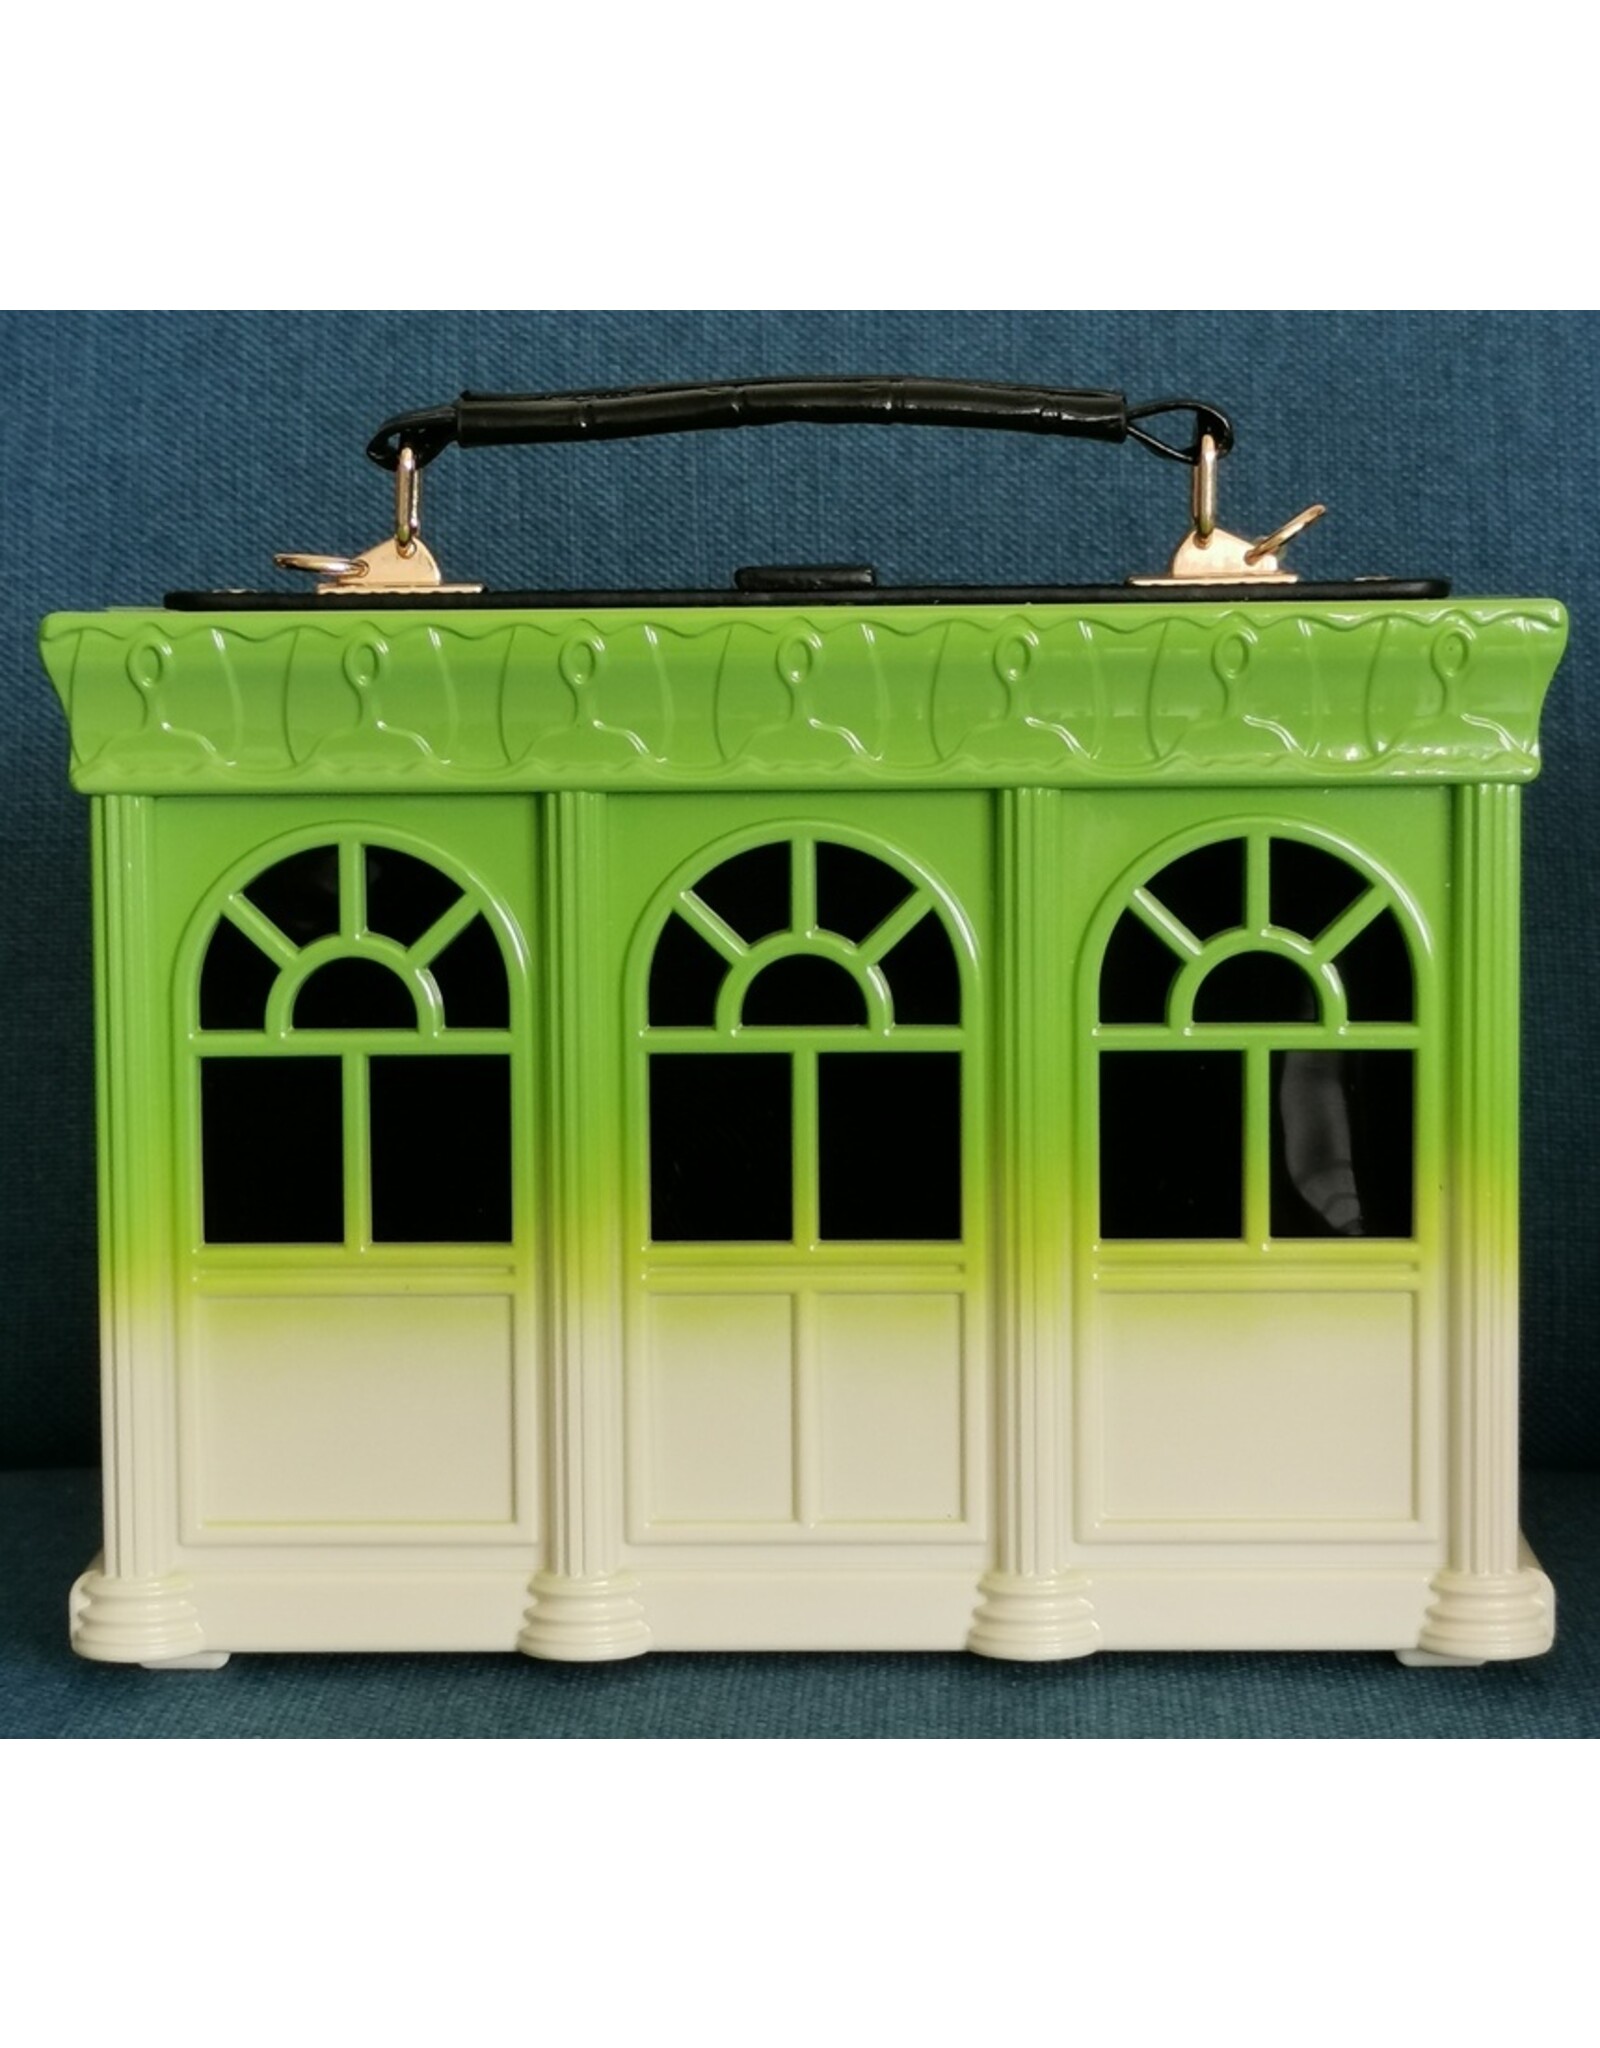 Systyle Fantasy bags and wallets - Handbag House Apple green-cream